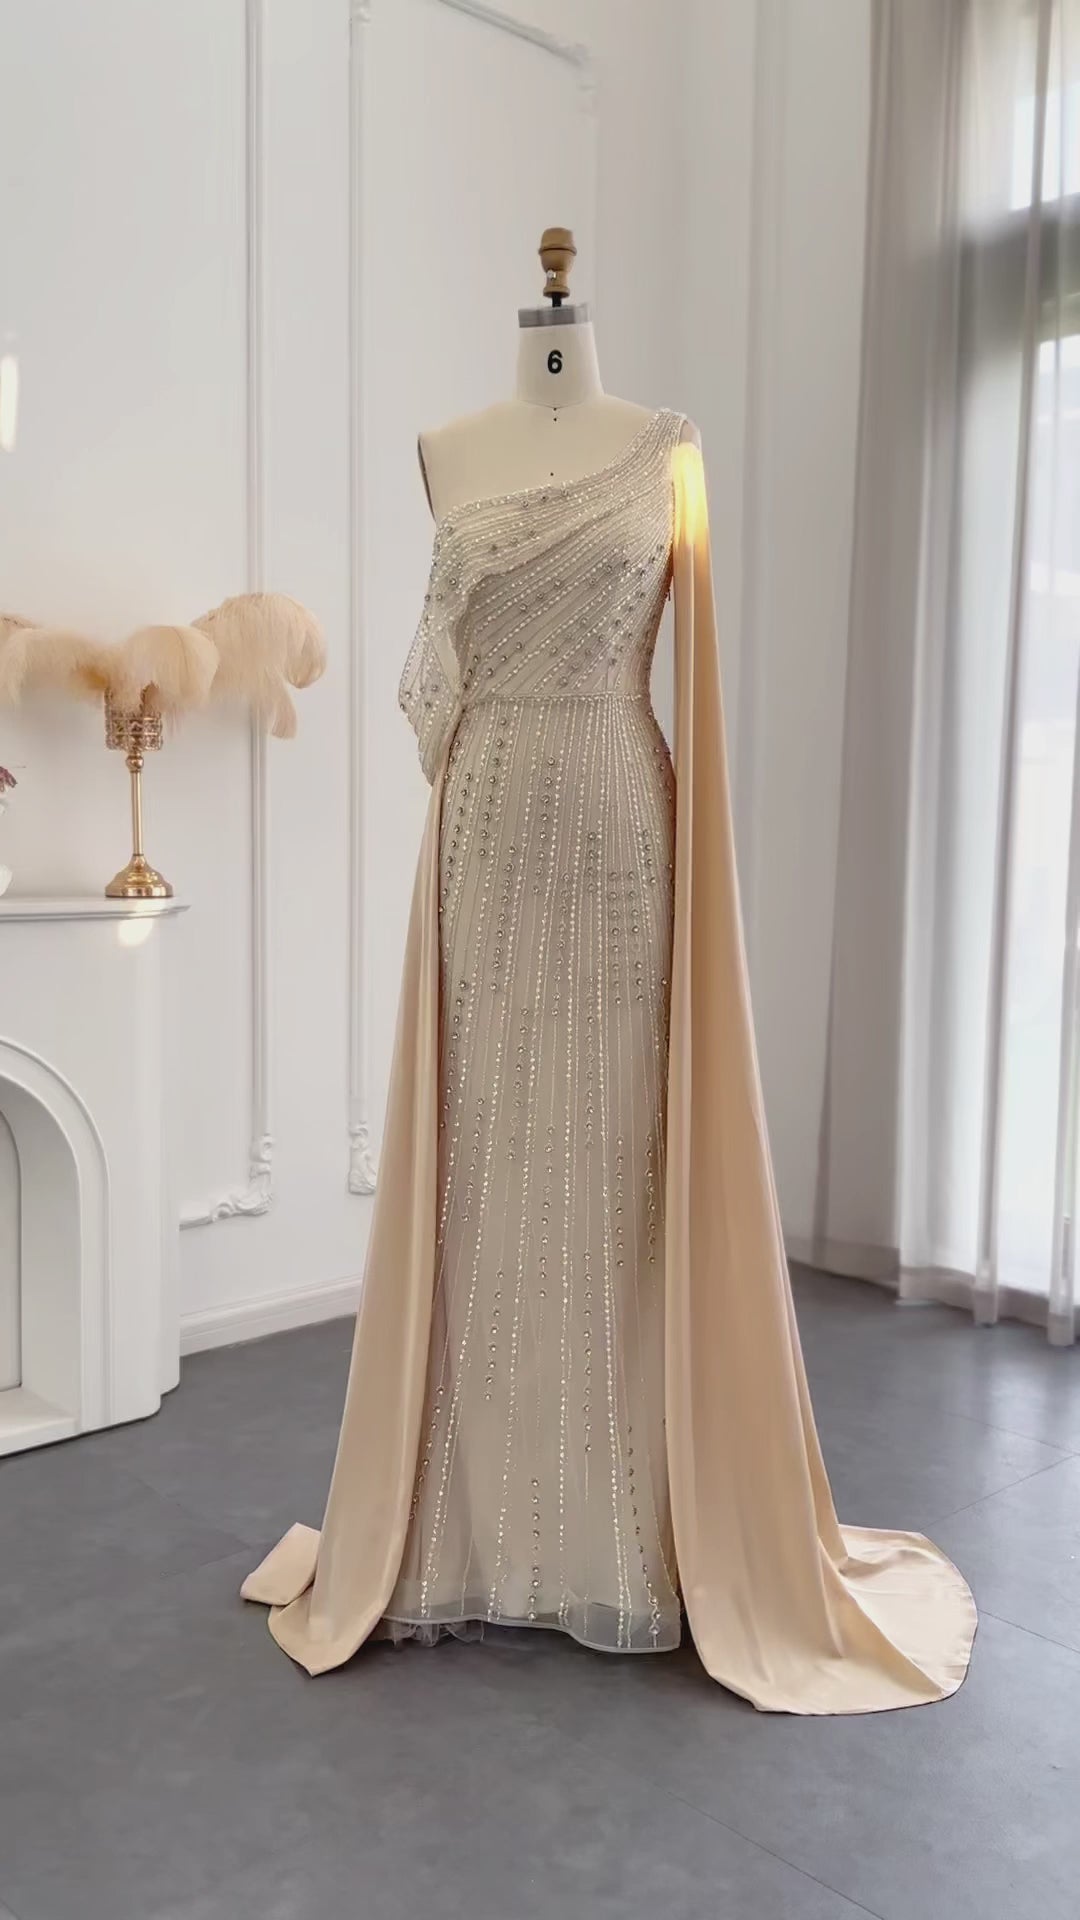 Dreamy Vow Arabic One Shoulder Mermaid Champagne Evening Dress Luxury Dubai Beaded Cape Sleeve Wedding Formal Party Gowns SS316